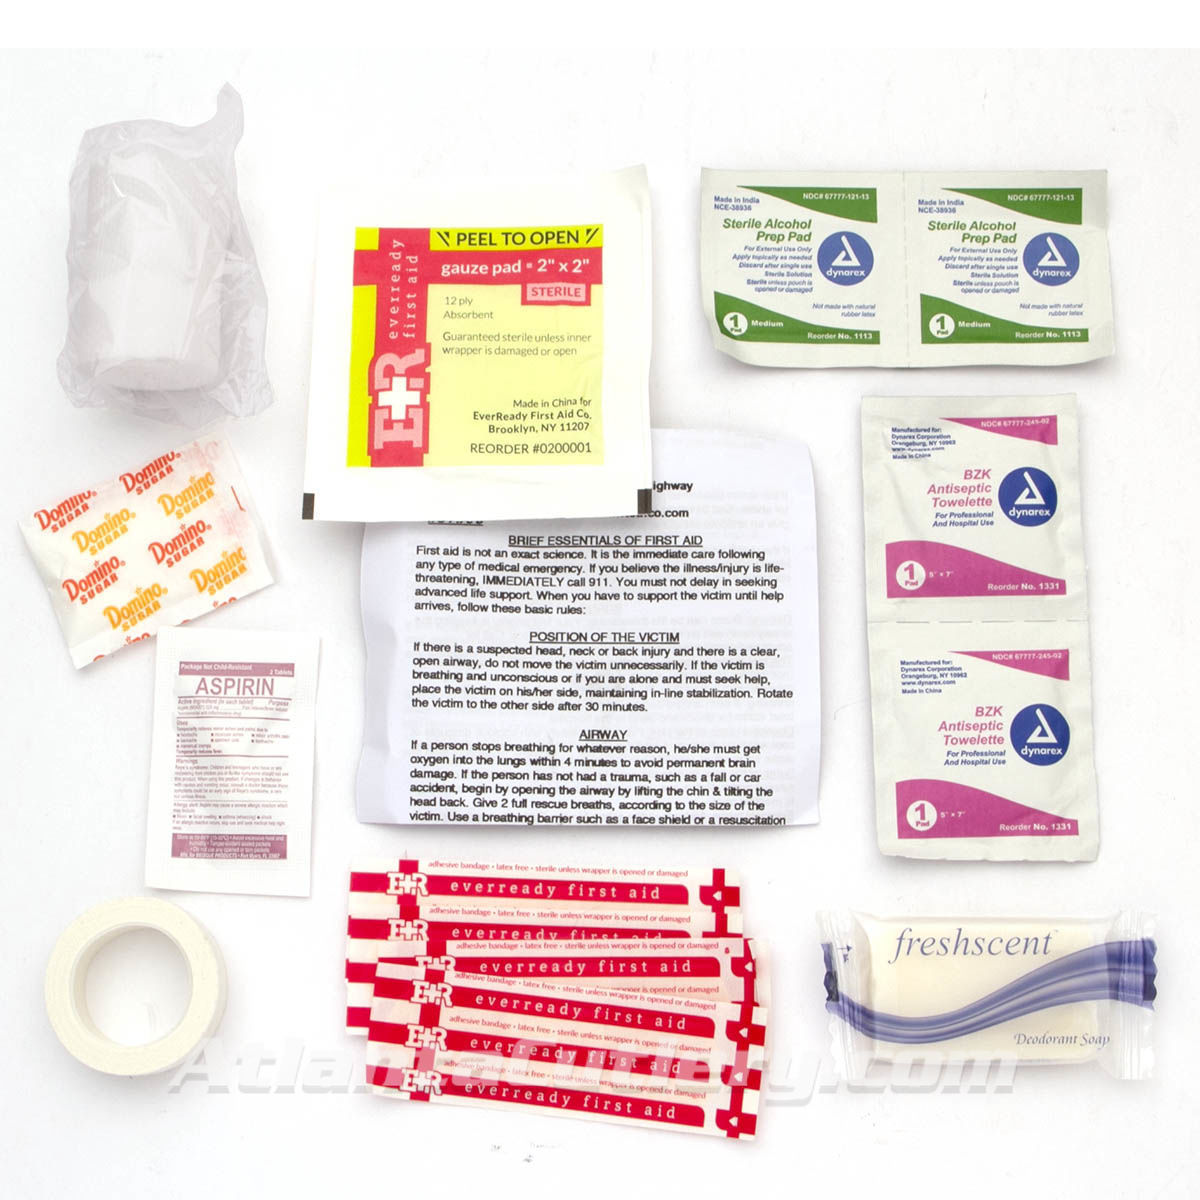 Canvas First Aid Kit includes Steripad, adhesive tape, bandages, alcohol prep pads, towelettes, sugar, soap, and aspirin.